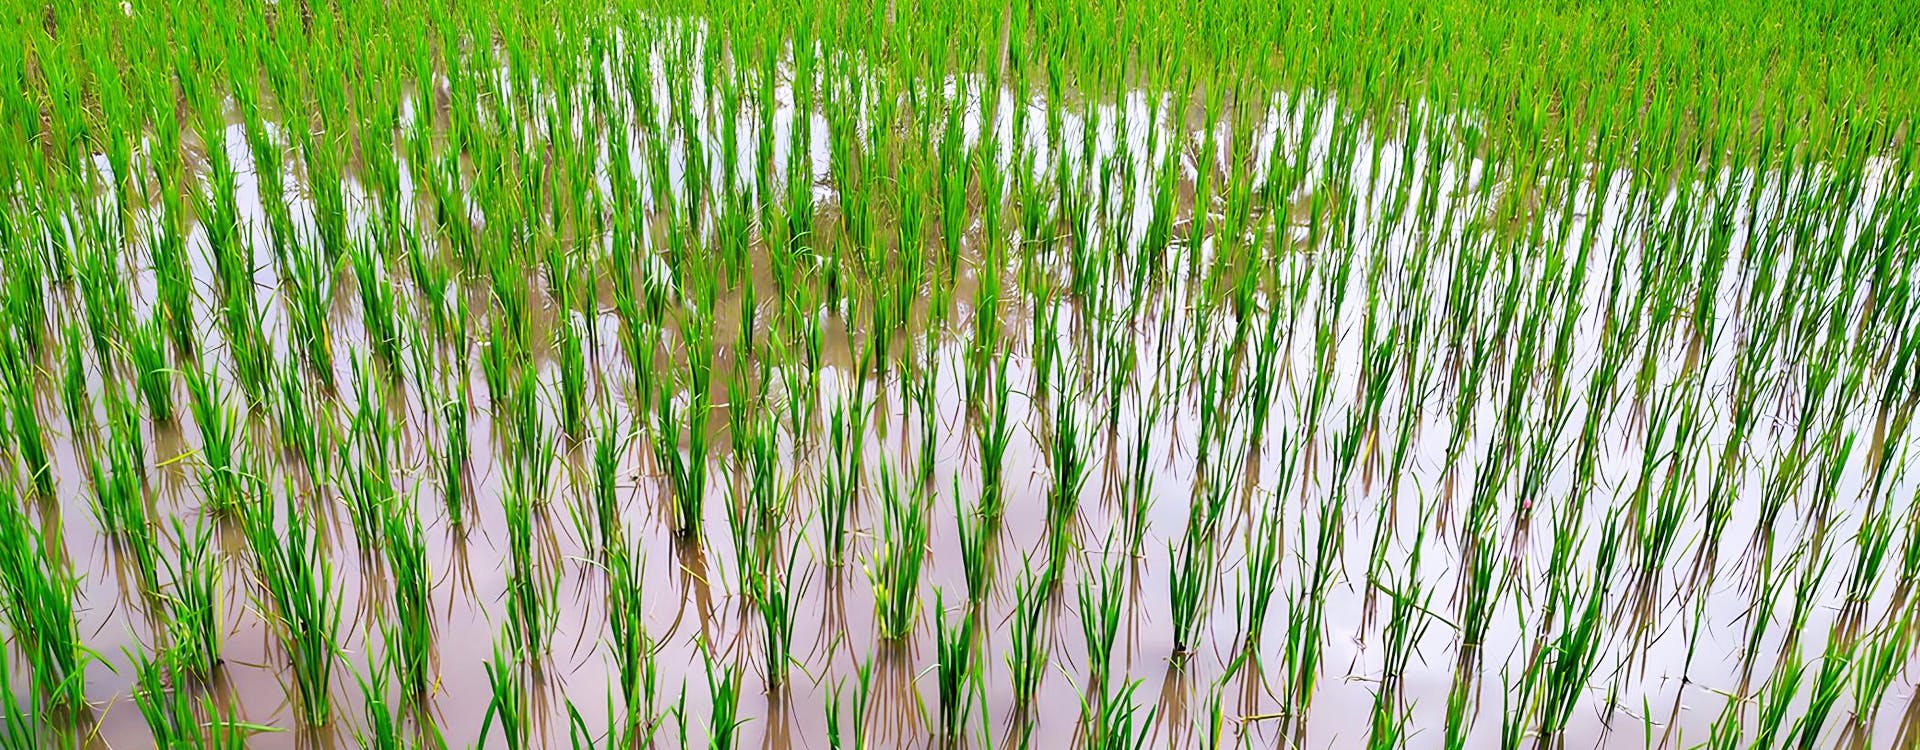 Rice Planting Festival in Nepal